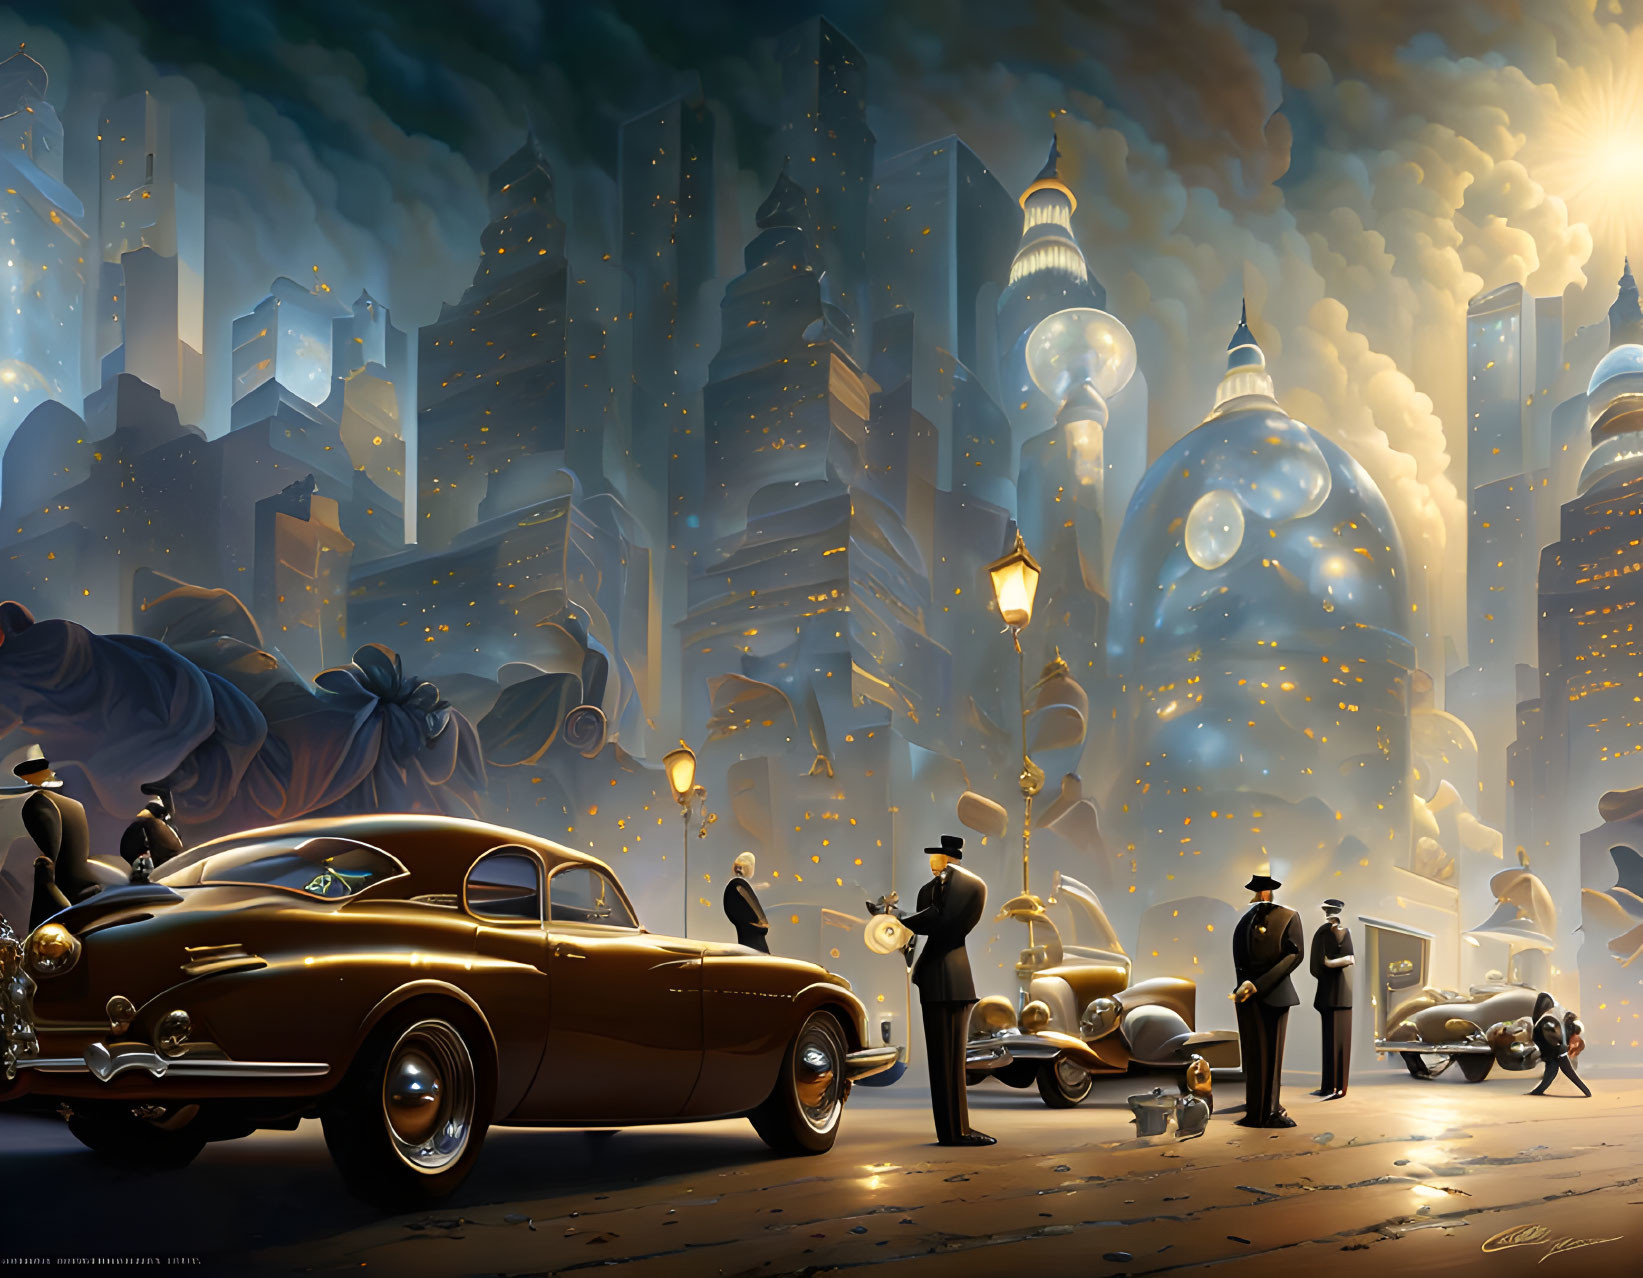 Vintage cars, stylish people, and art deco buildings in a retro-futuristic cityscape